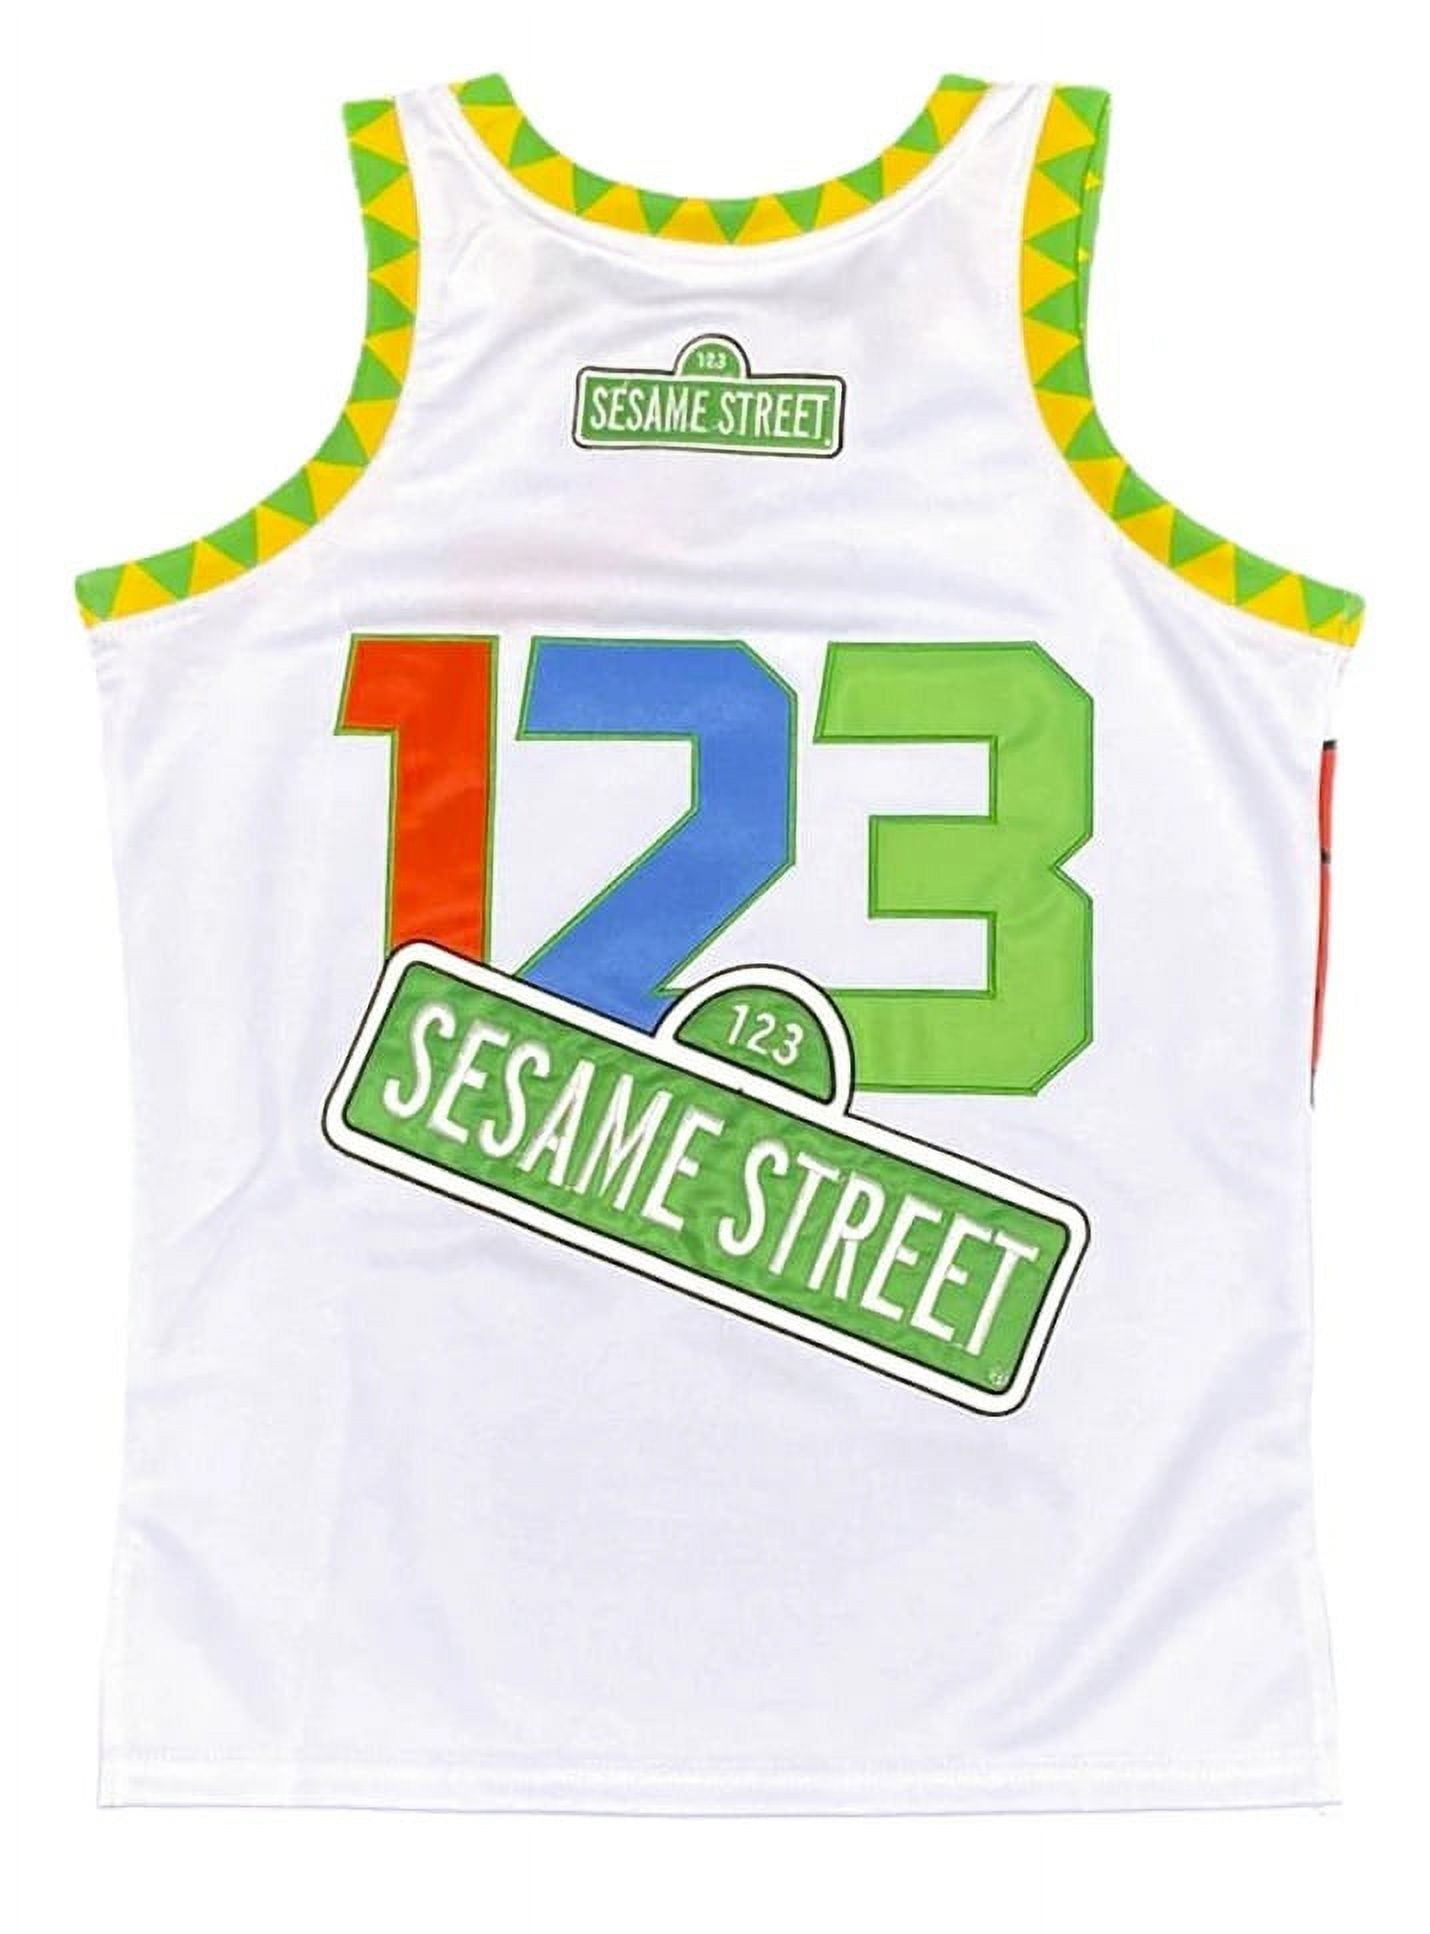 Bleacher Report's NBA Remix Collection Jerseys With Future & Big